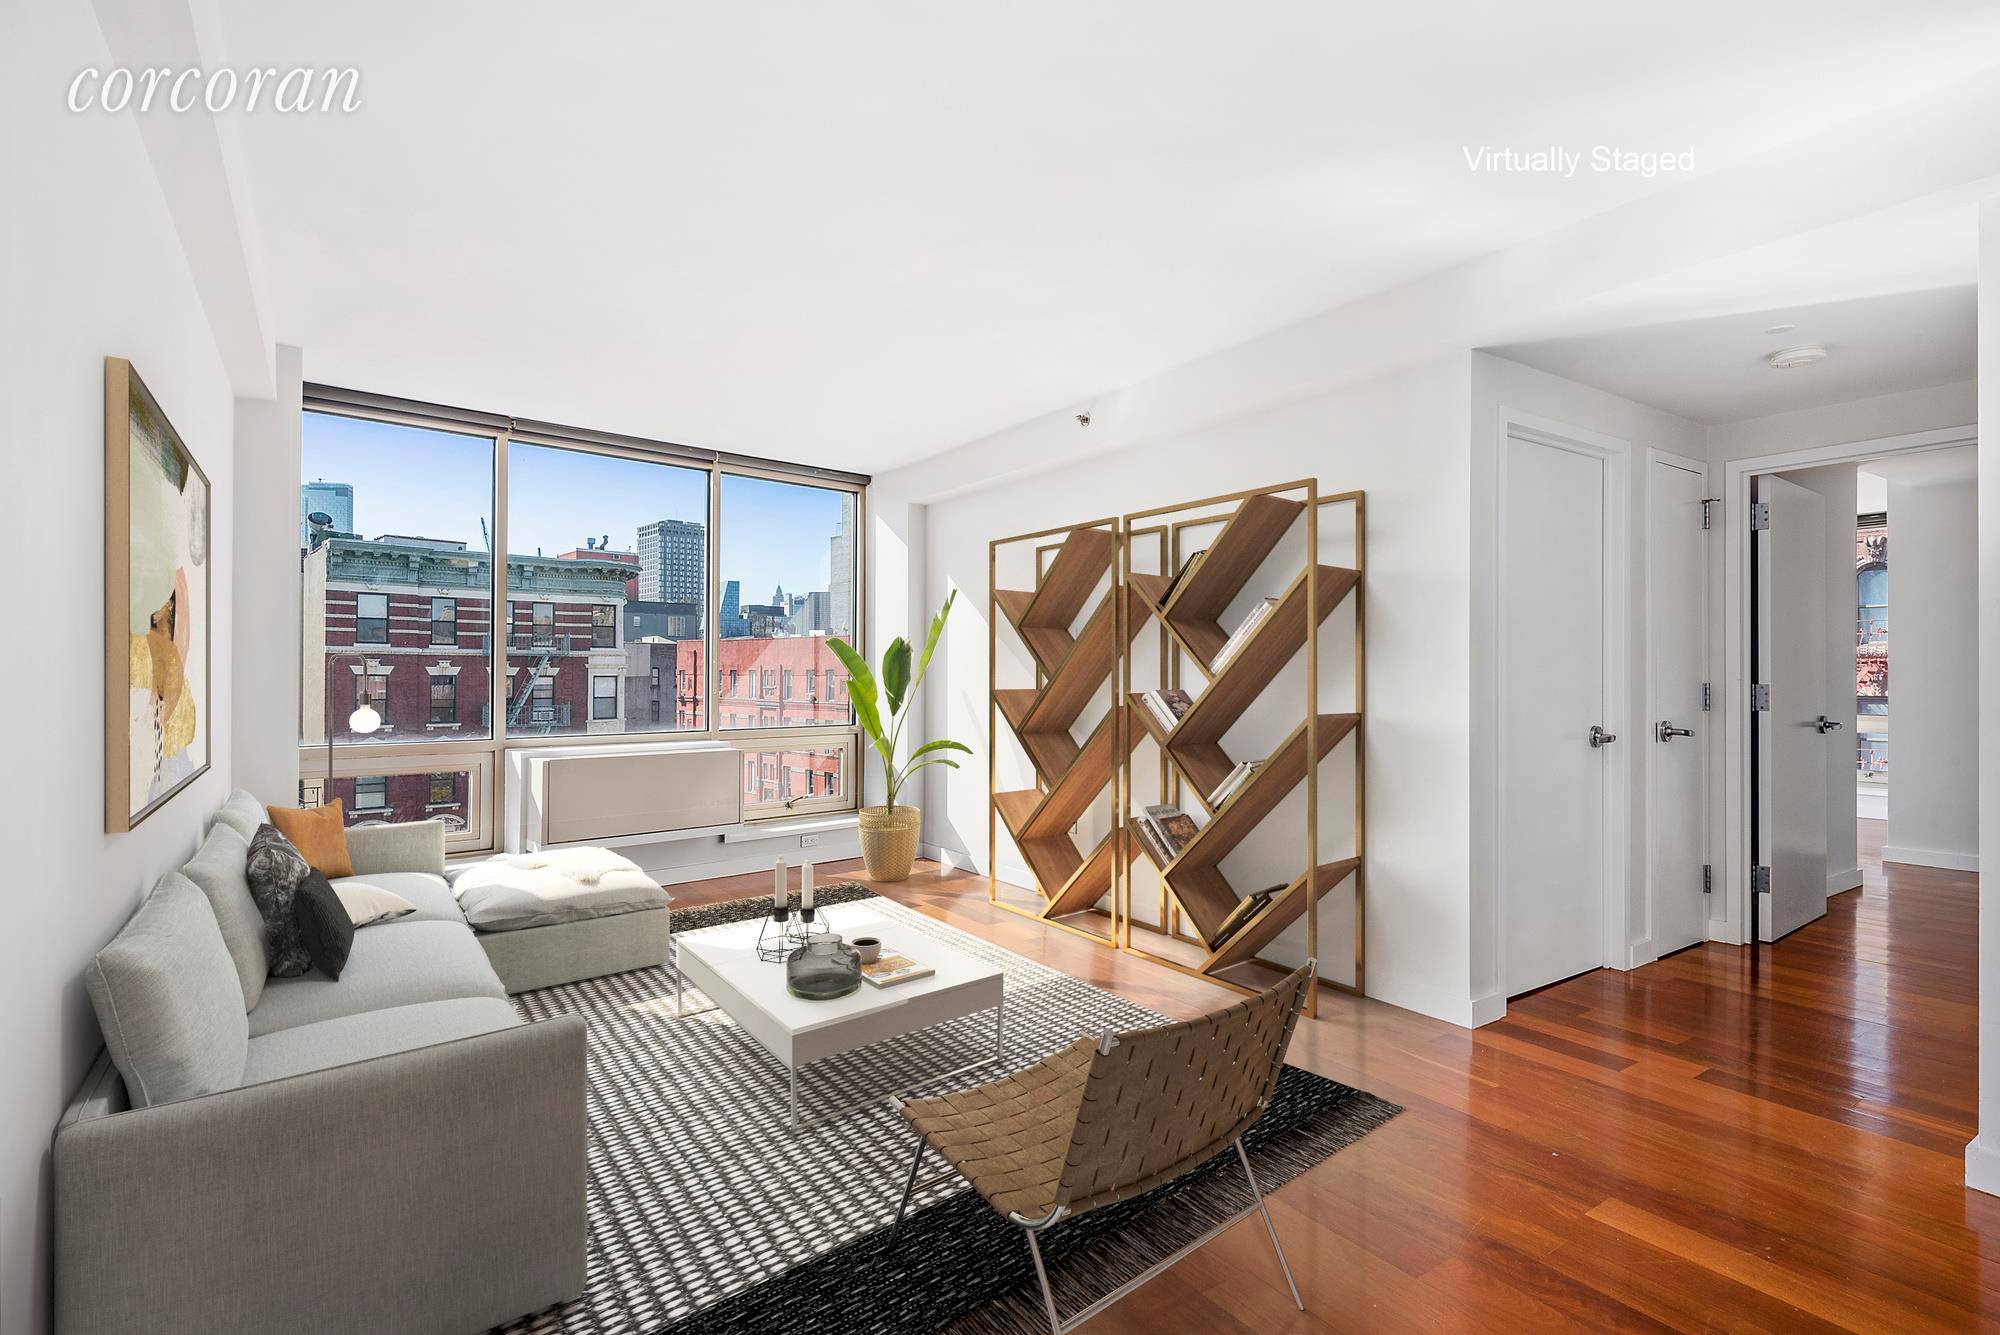 Ideally situated on the edge of both Lower East Side and East Village this 2 Bed 2 Bath Condo at 1 Avenue B gets great southern light with open views ...